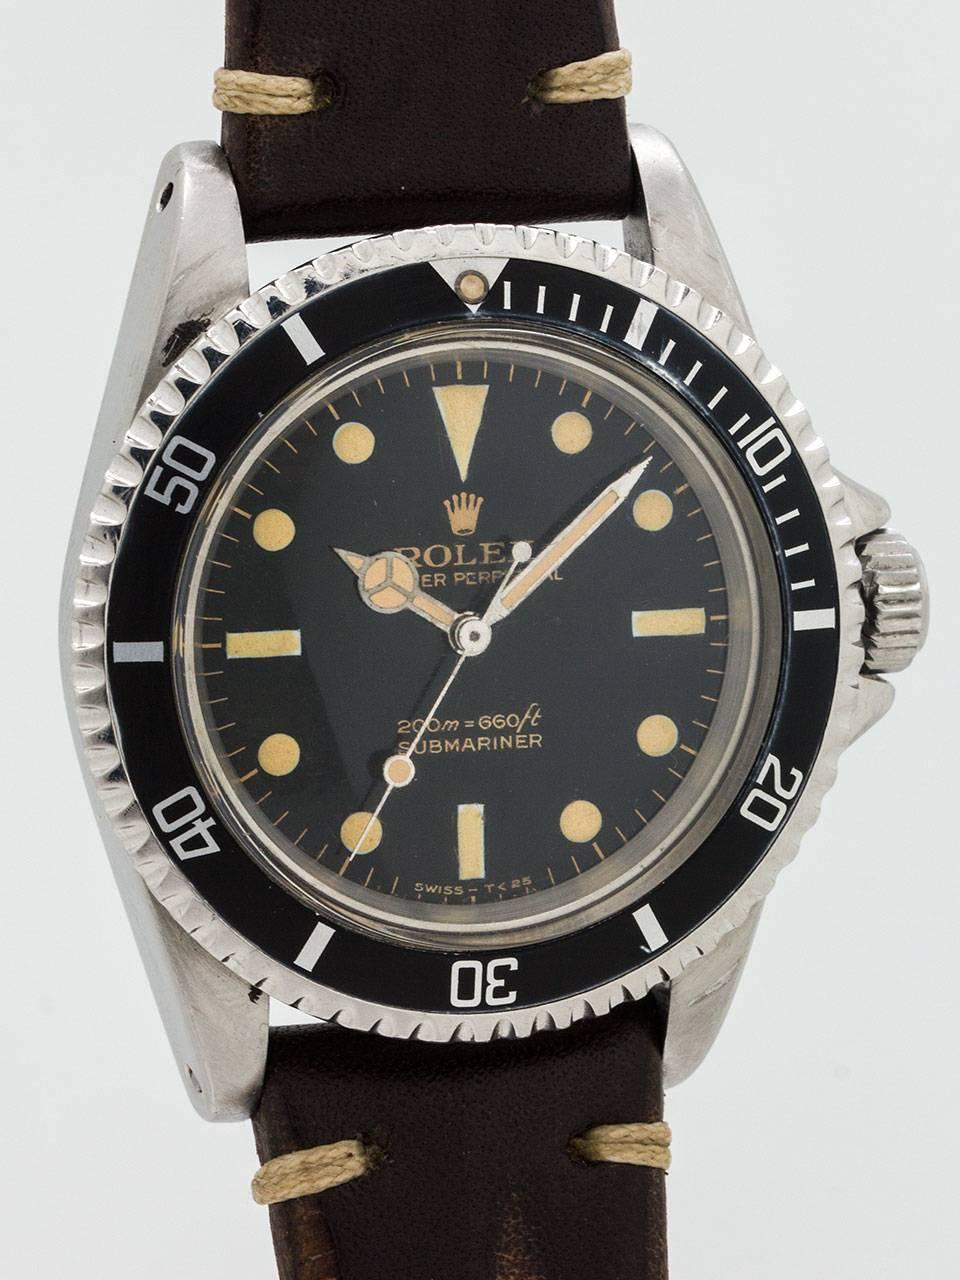 Great example vintage Rolex Submariner ref 5513 with exceptional condition original gilt so called “Bart Simpson” dial, serial no. 1.3 million circa 1966. A scarce and very desirable gilt dial example, pristine condition glossy surface without